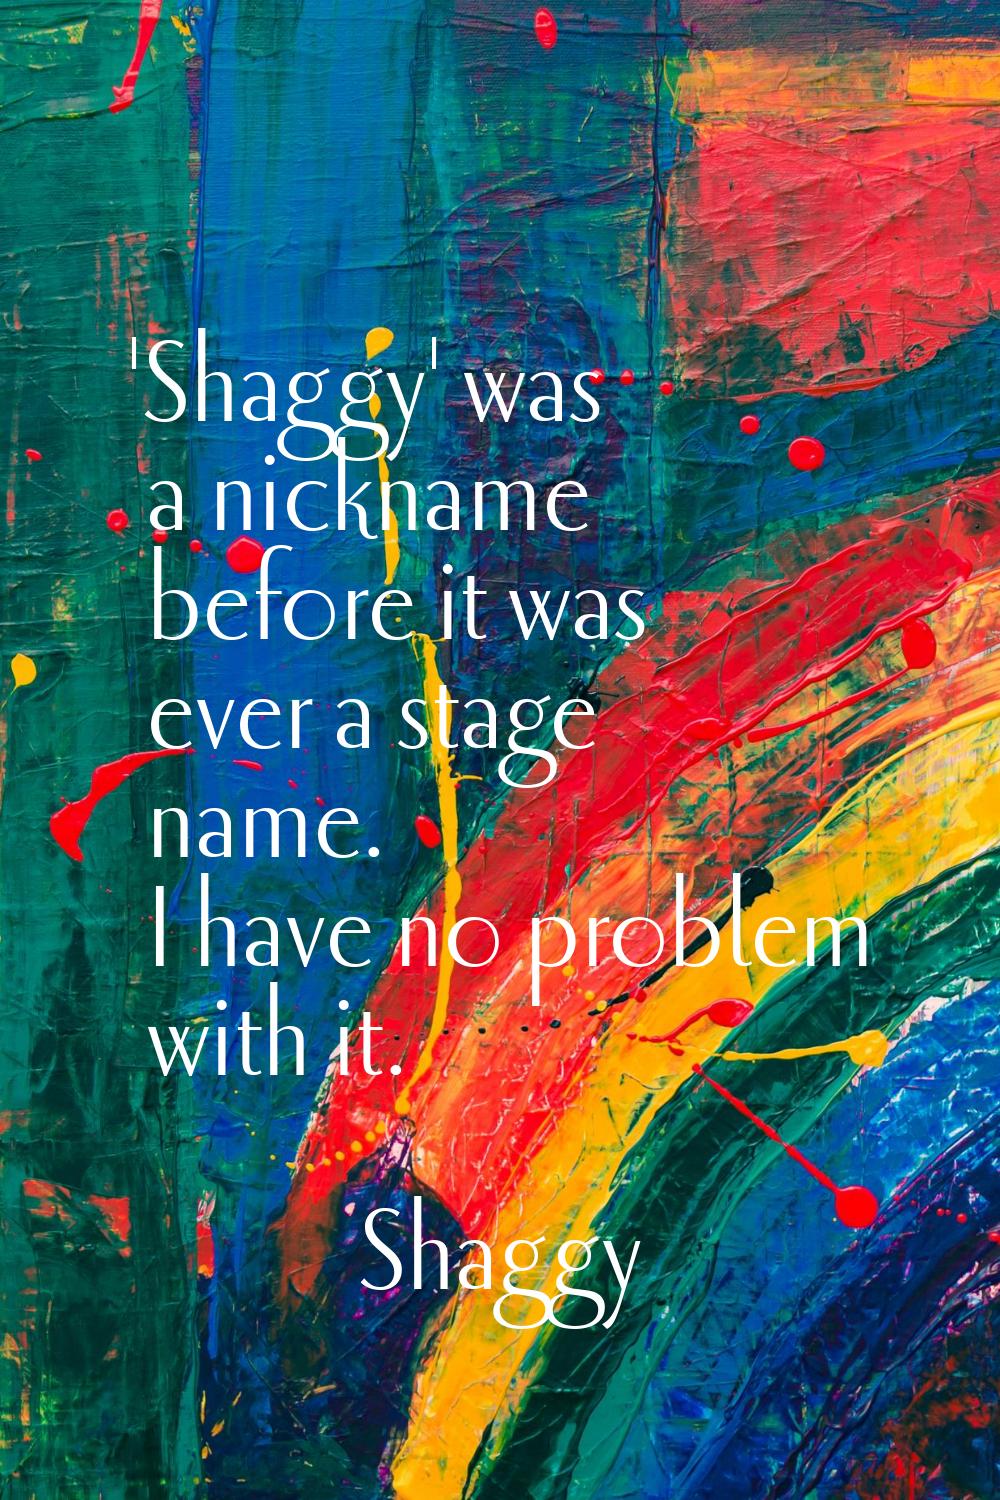 'Shaggy' was a nickname before it was ever a stage name. I have no problem with it.